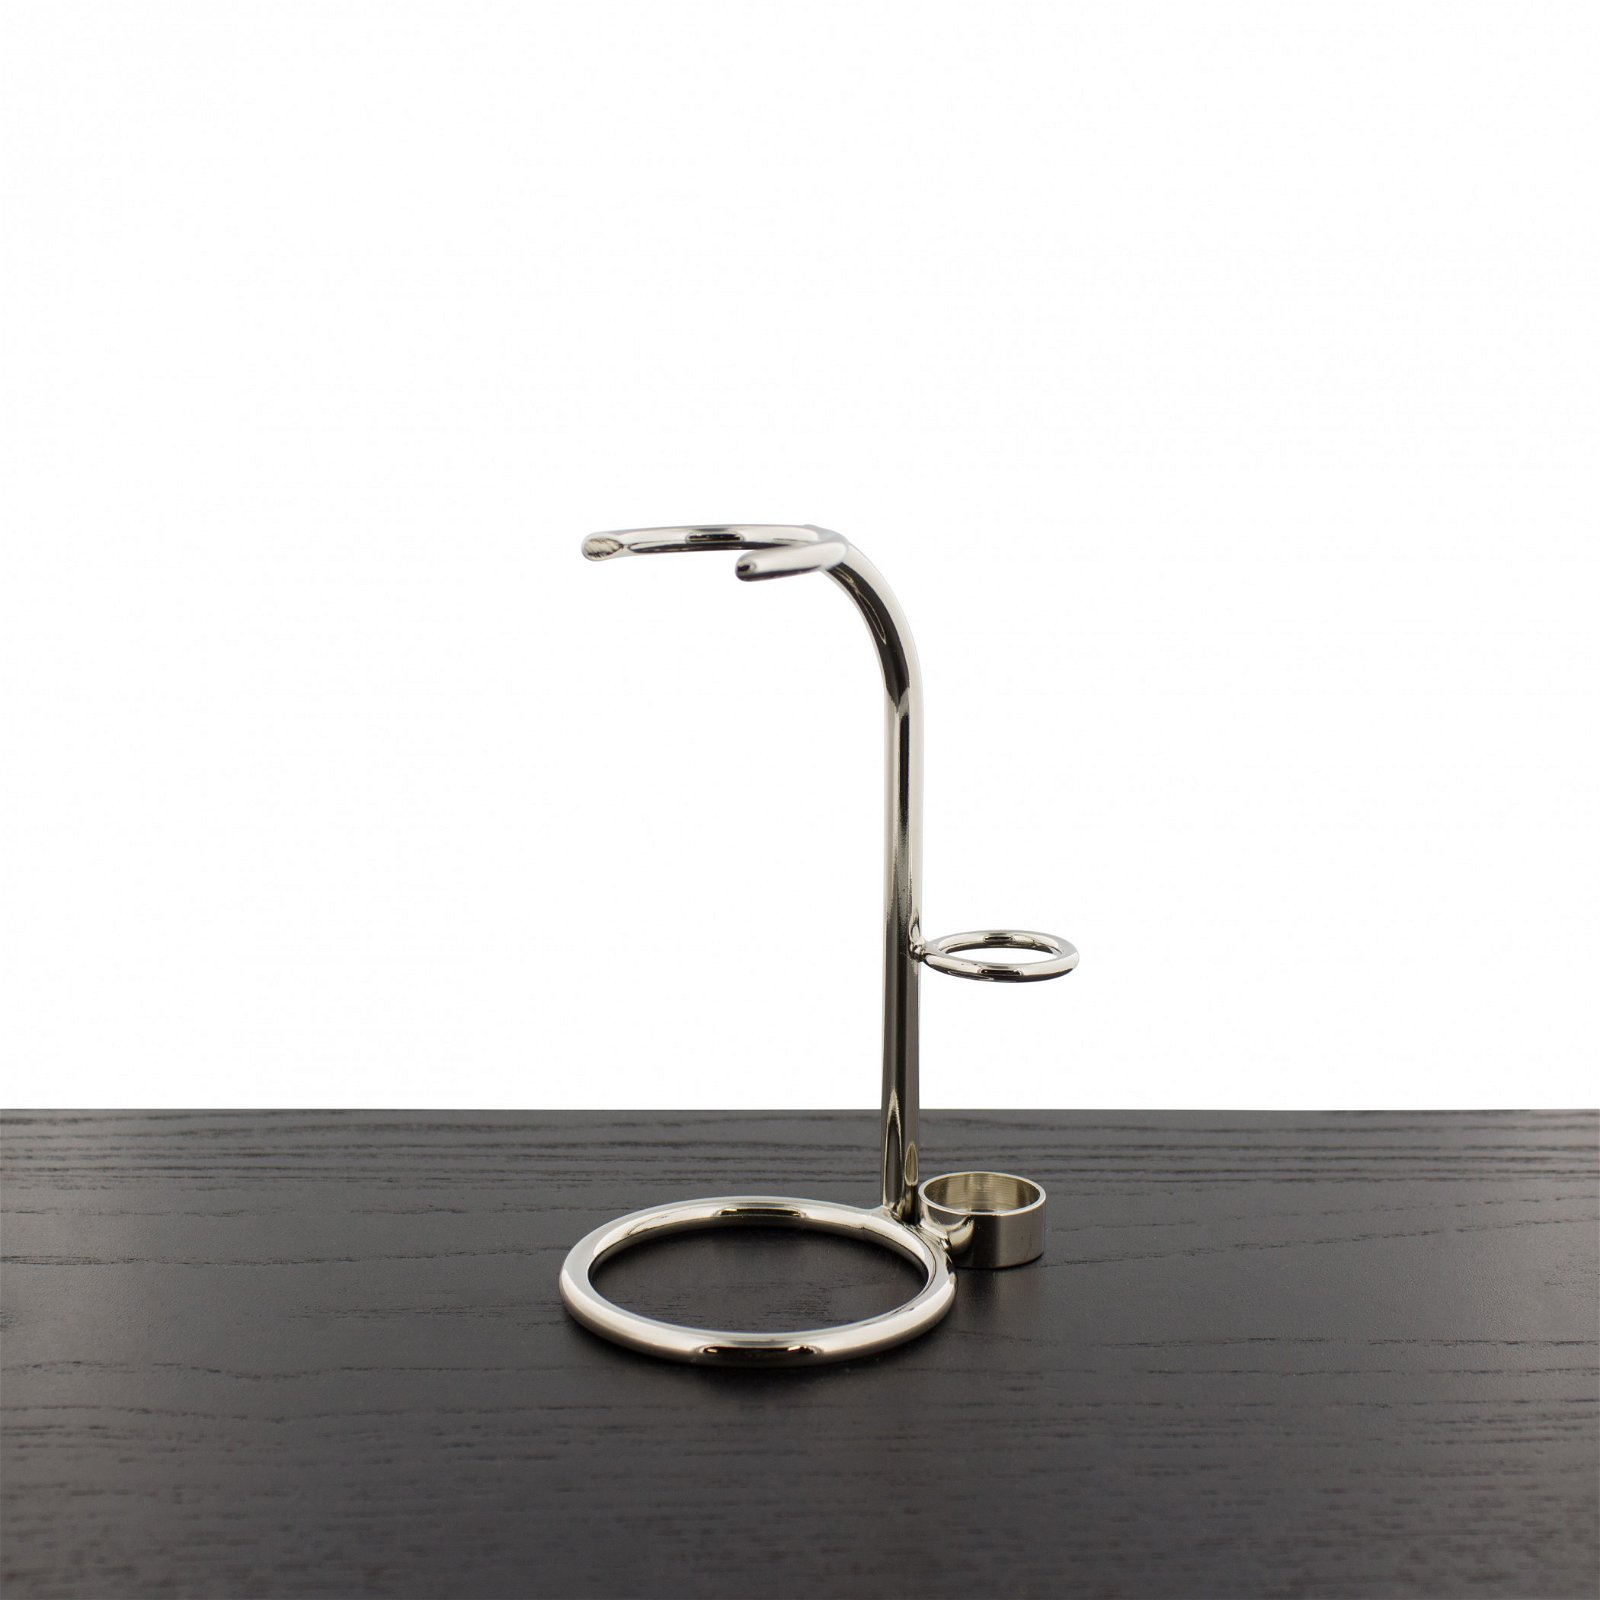 Image of Cyril R Salter Nickel Shaving Stand